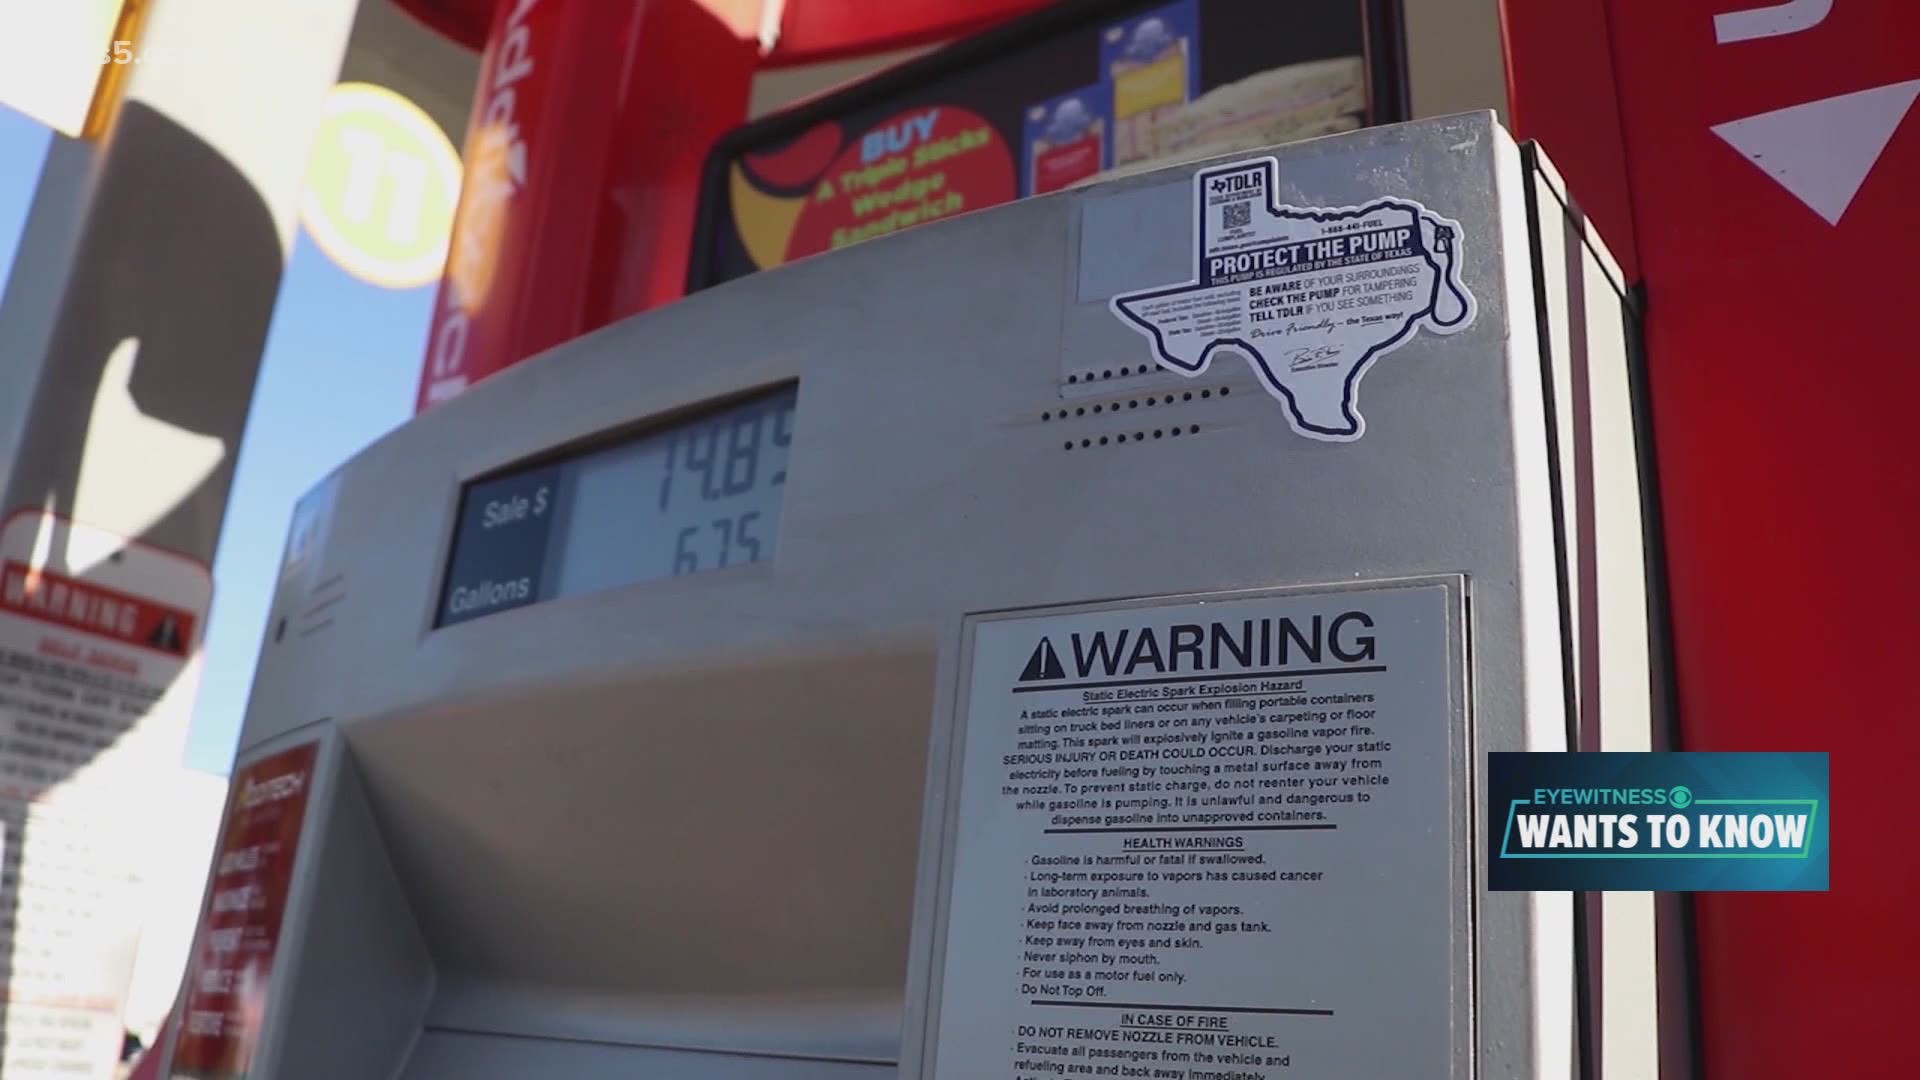 For the last 2 years, police have consistently found skimmers at San Antonio businesses. But for the last 2 months, police say they have not found a single skimmer.